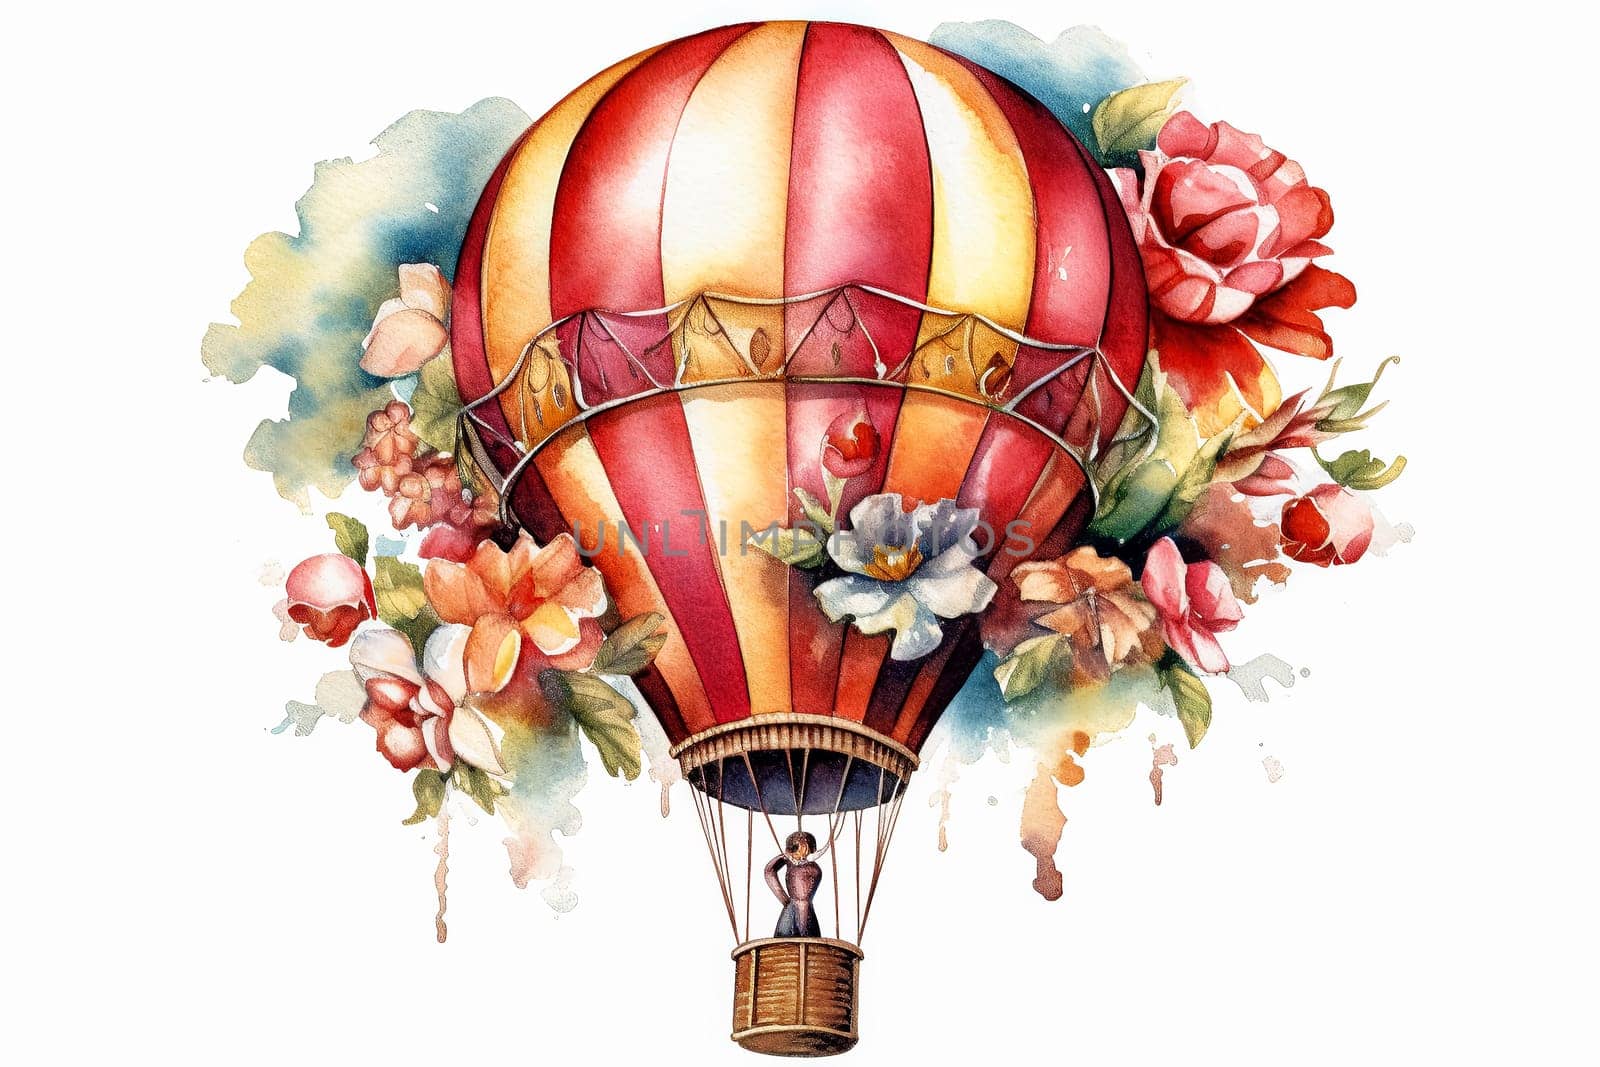 hot air balloon adorned with floral designs, floating gracefully in the sky by Alla_Morozova93